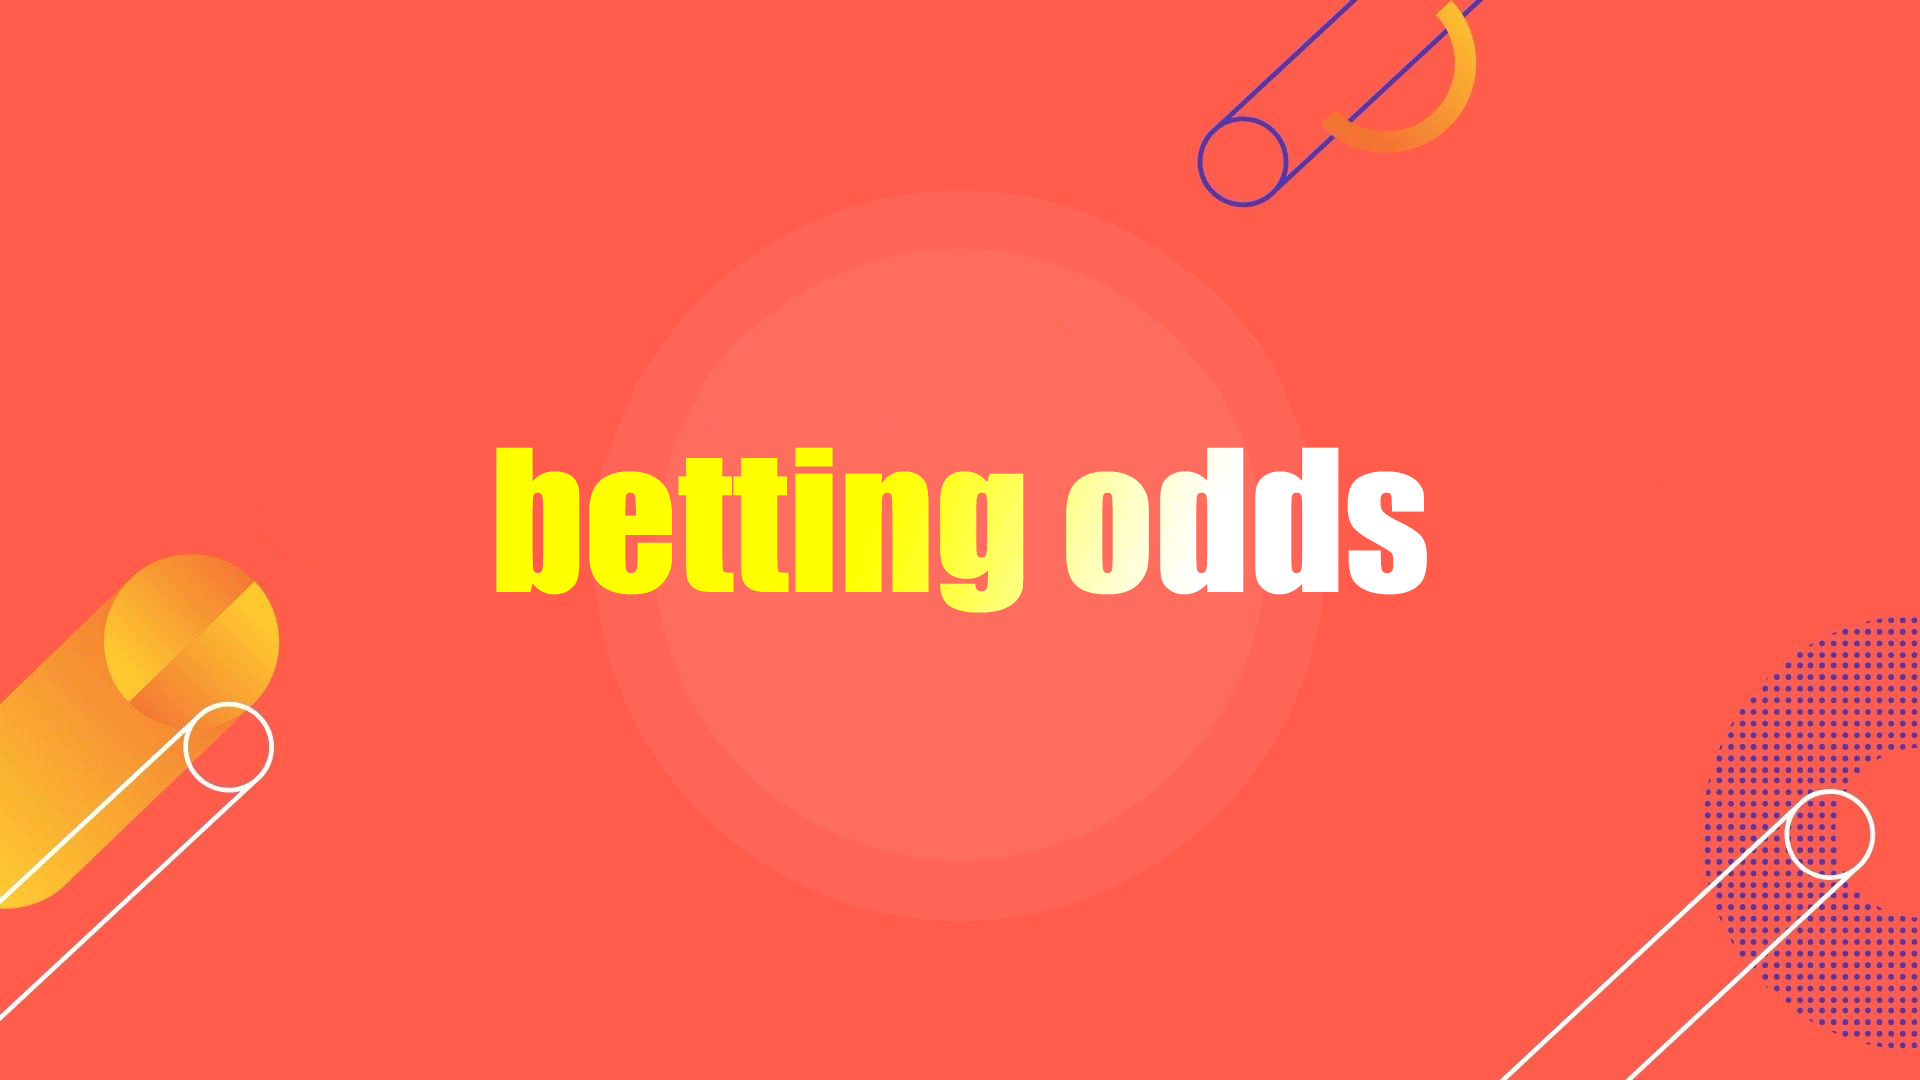 Here are some benefits of cricket betting odds so you can use them wisely